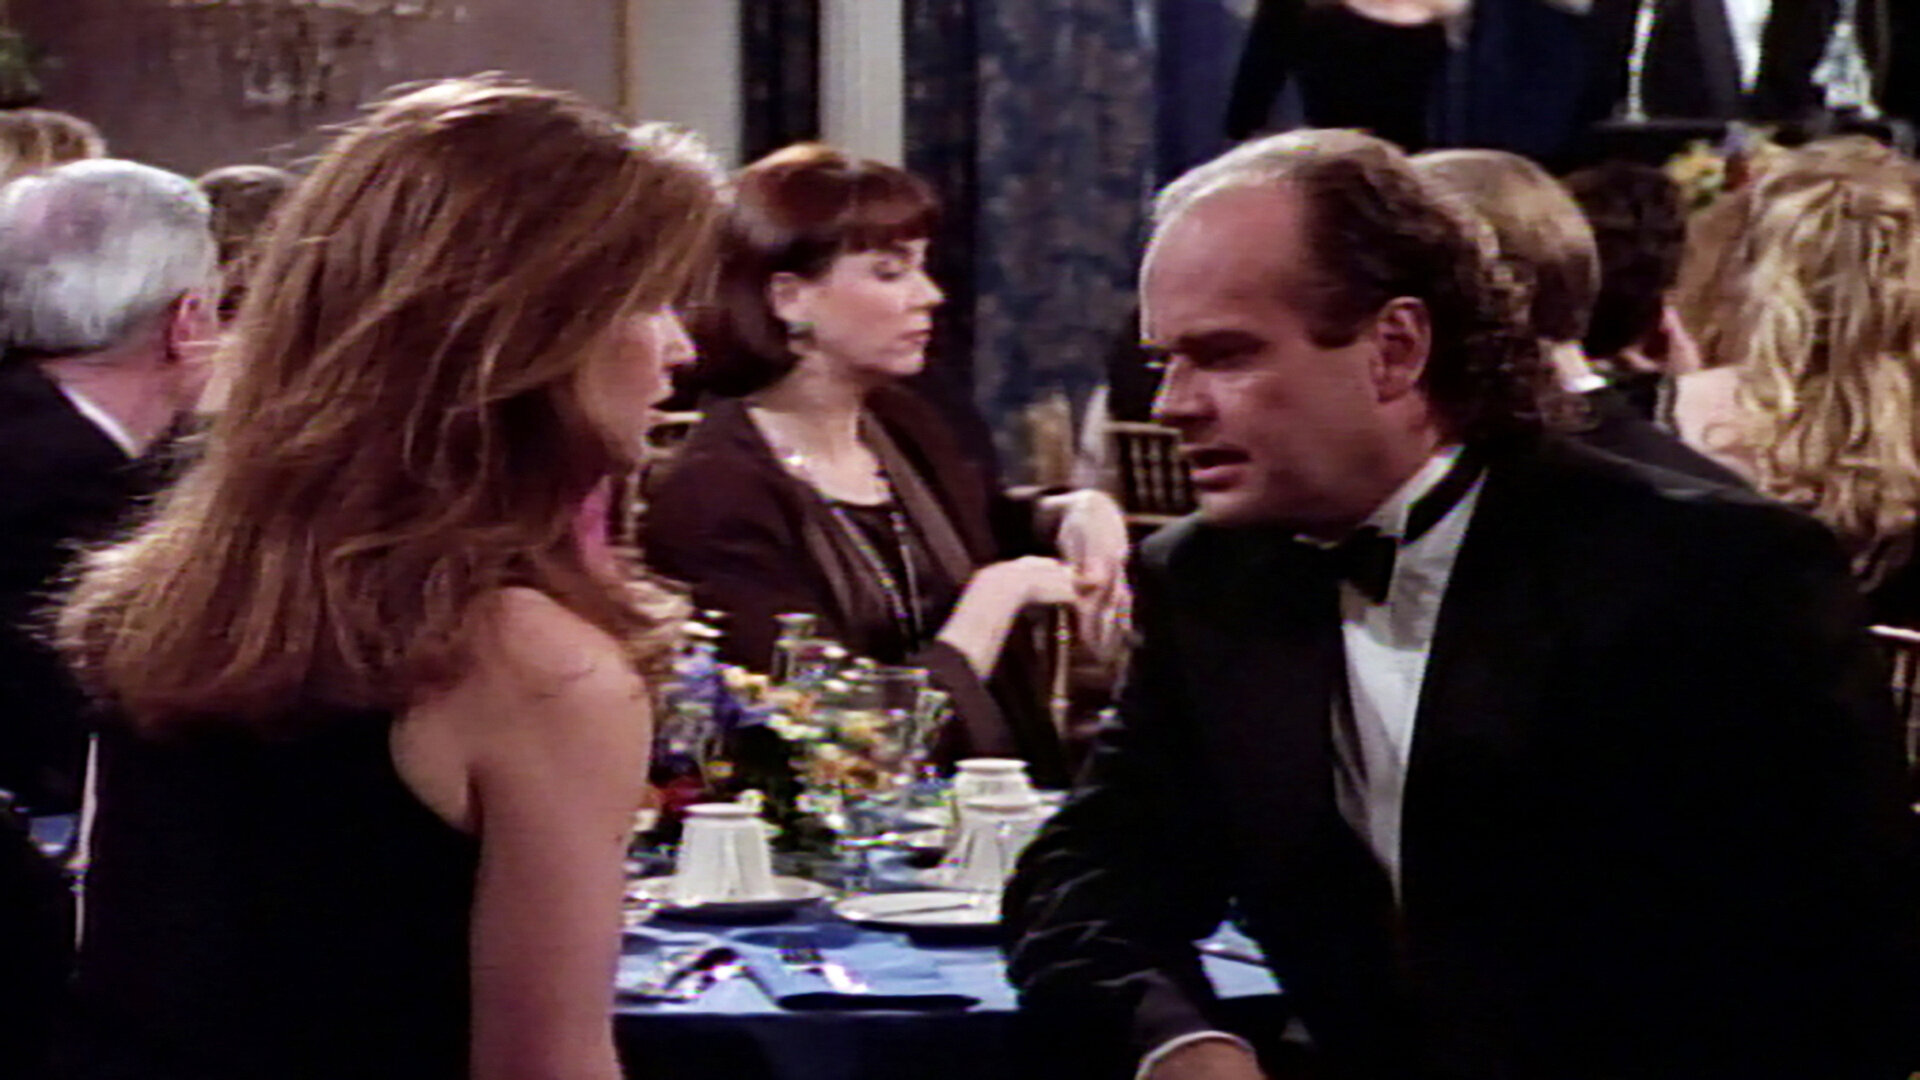 And the Whimper is... - Frasier 1x18 | TVmaze